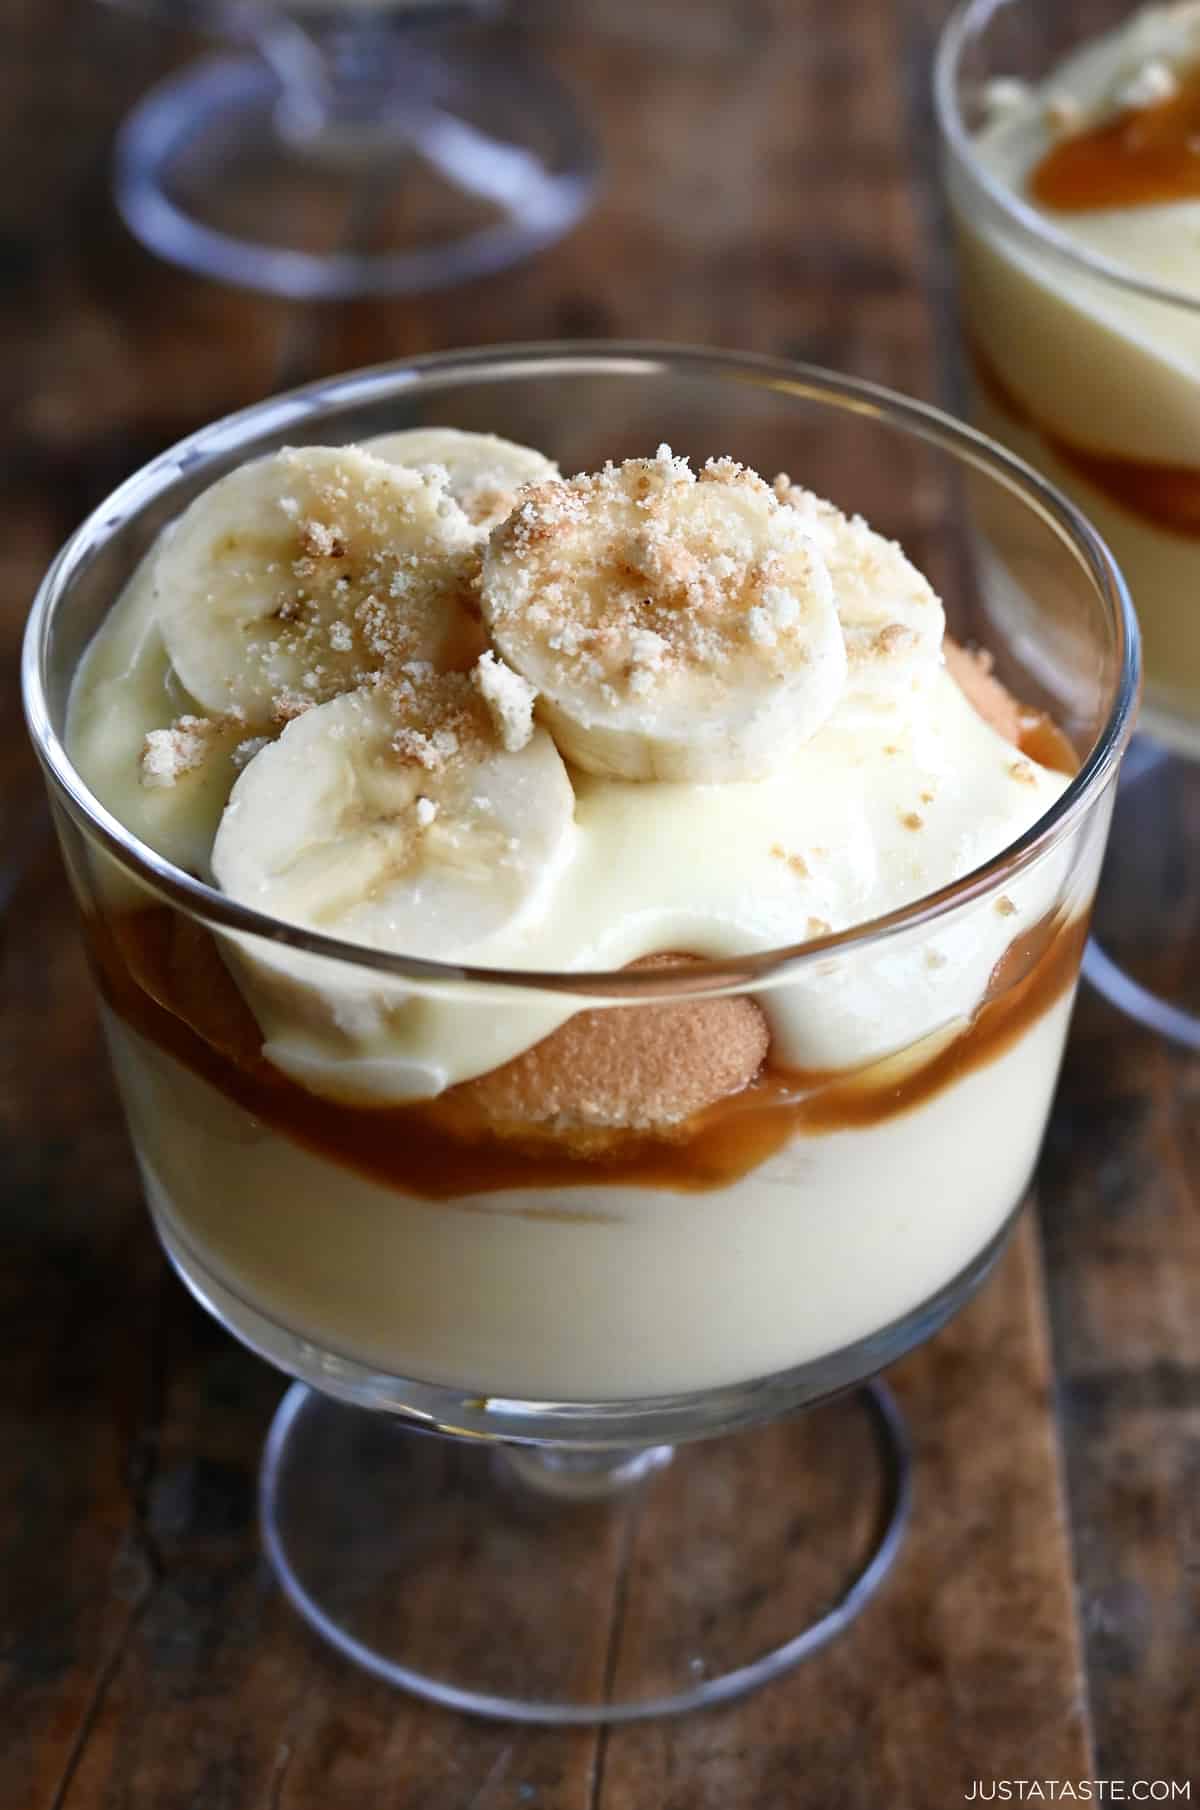 Banana pudding with salted caramel sauce, fresh sliced bananas and mini vanilla wafers in a parfait glass.